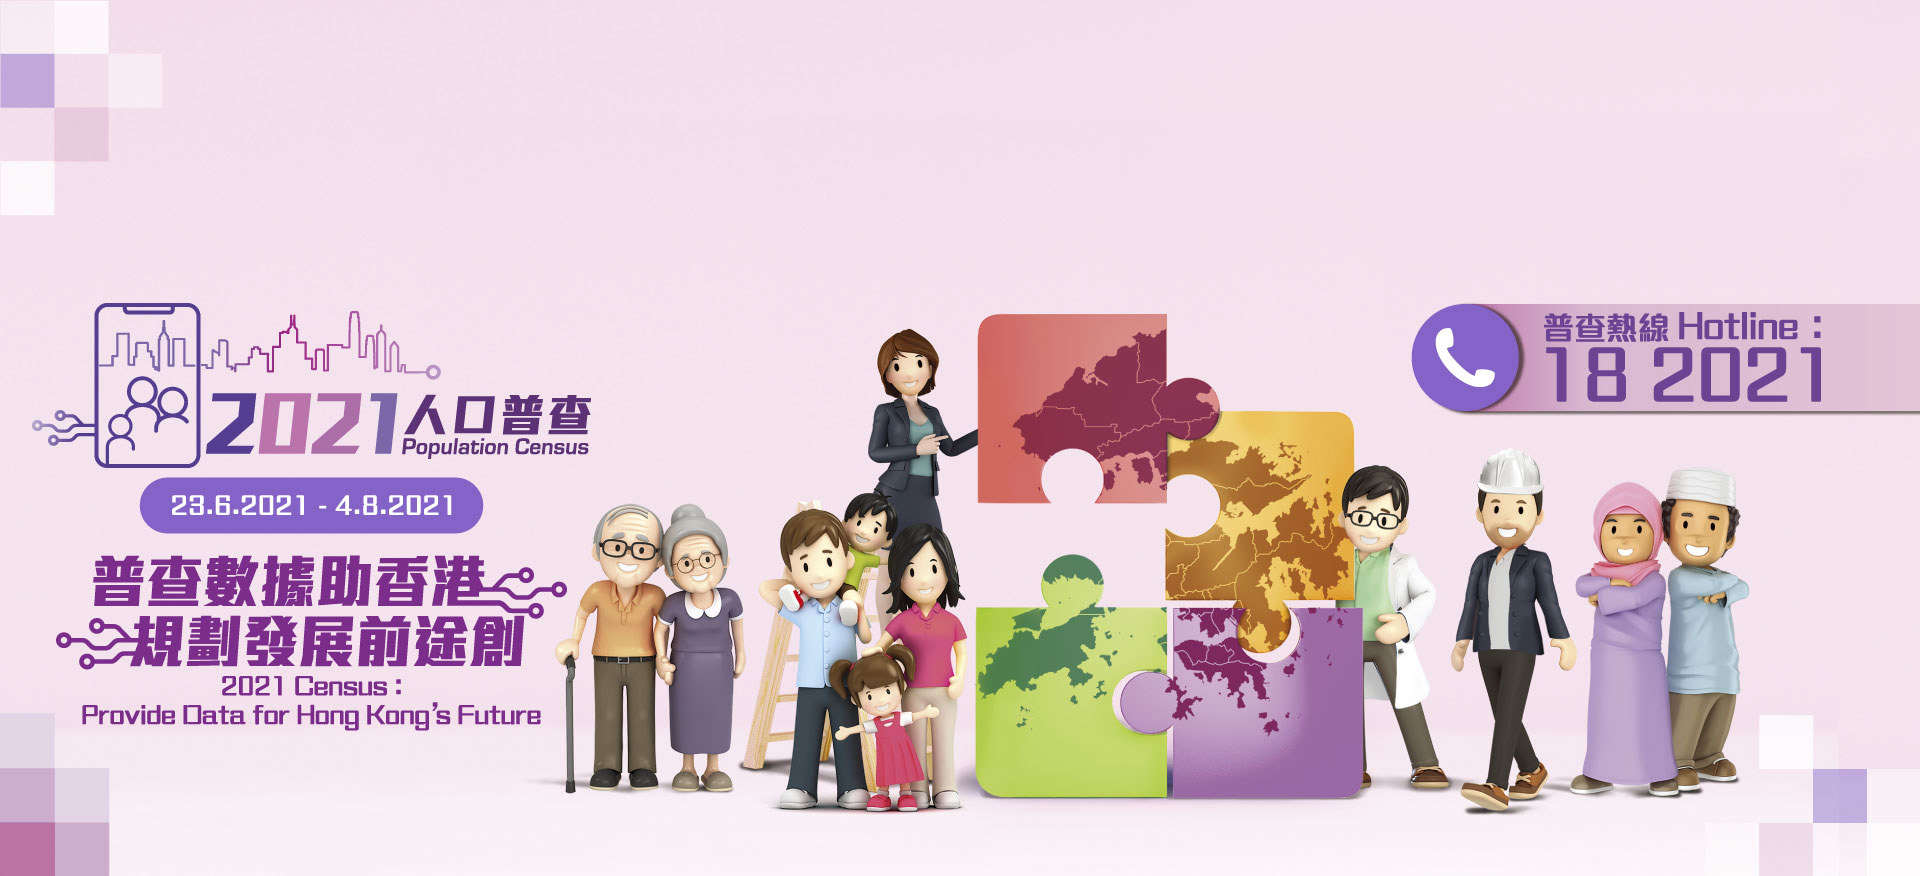 Promotional banner of the 2021 Census